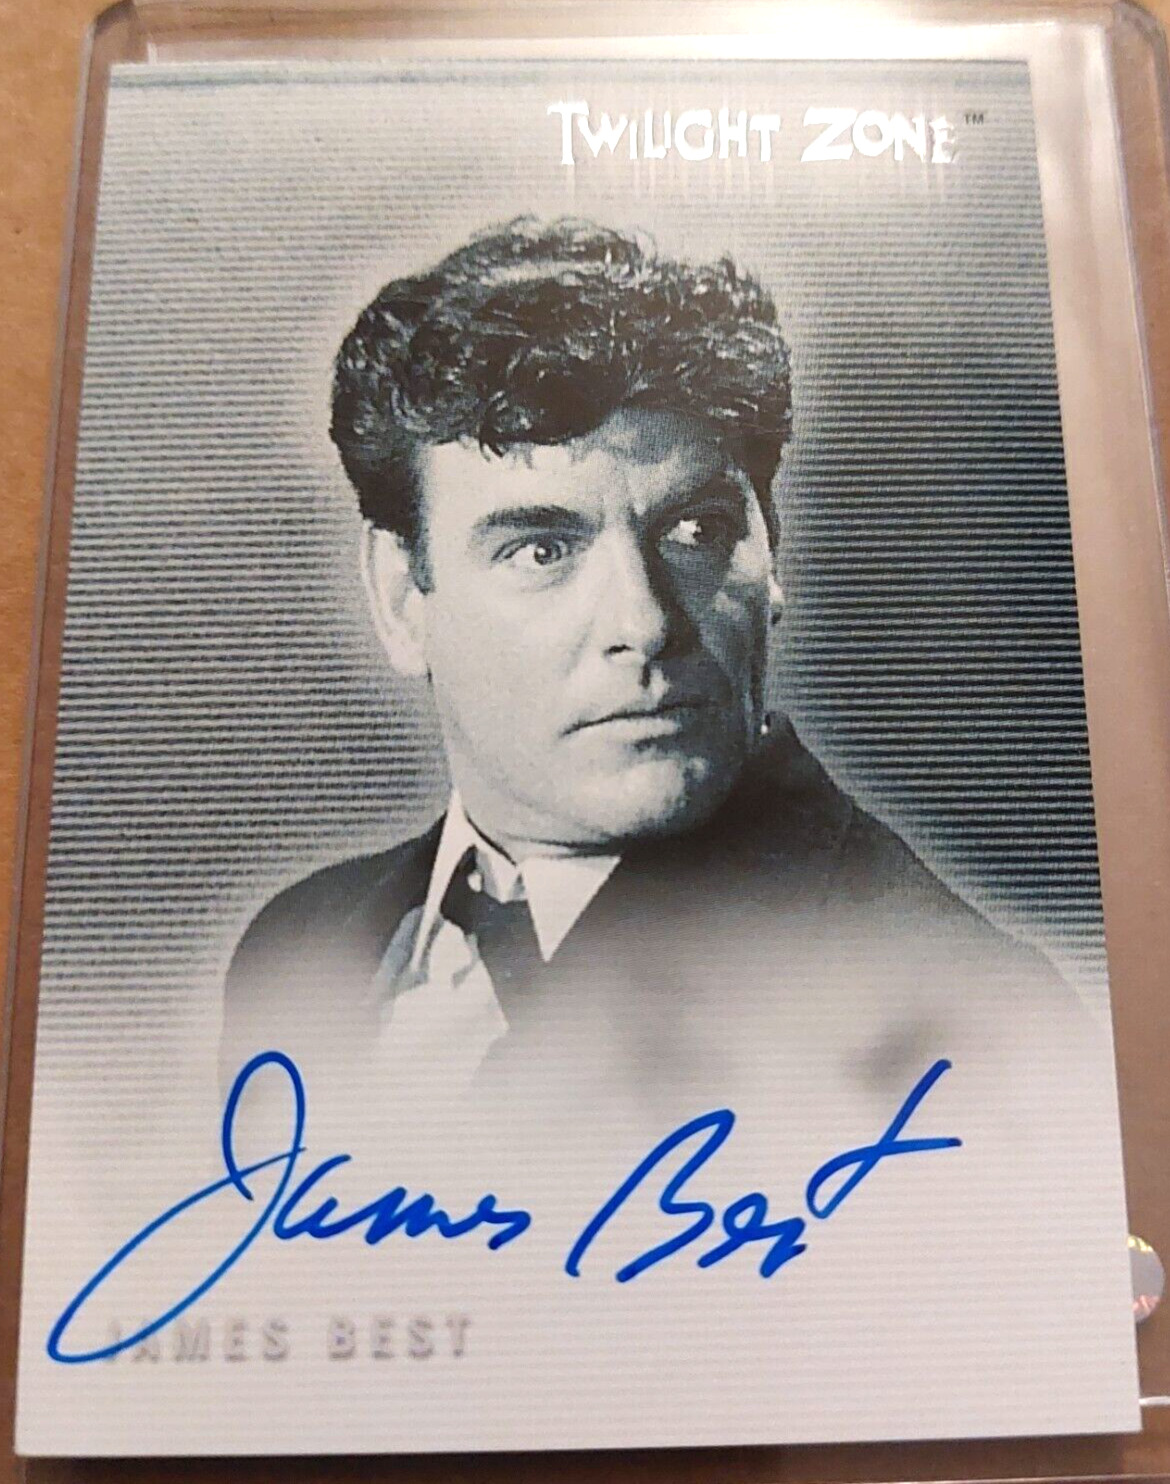 2000 Twilight Zone Series 2 The Next Dimension James Best A32 autograph card HTF